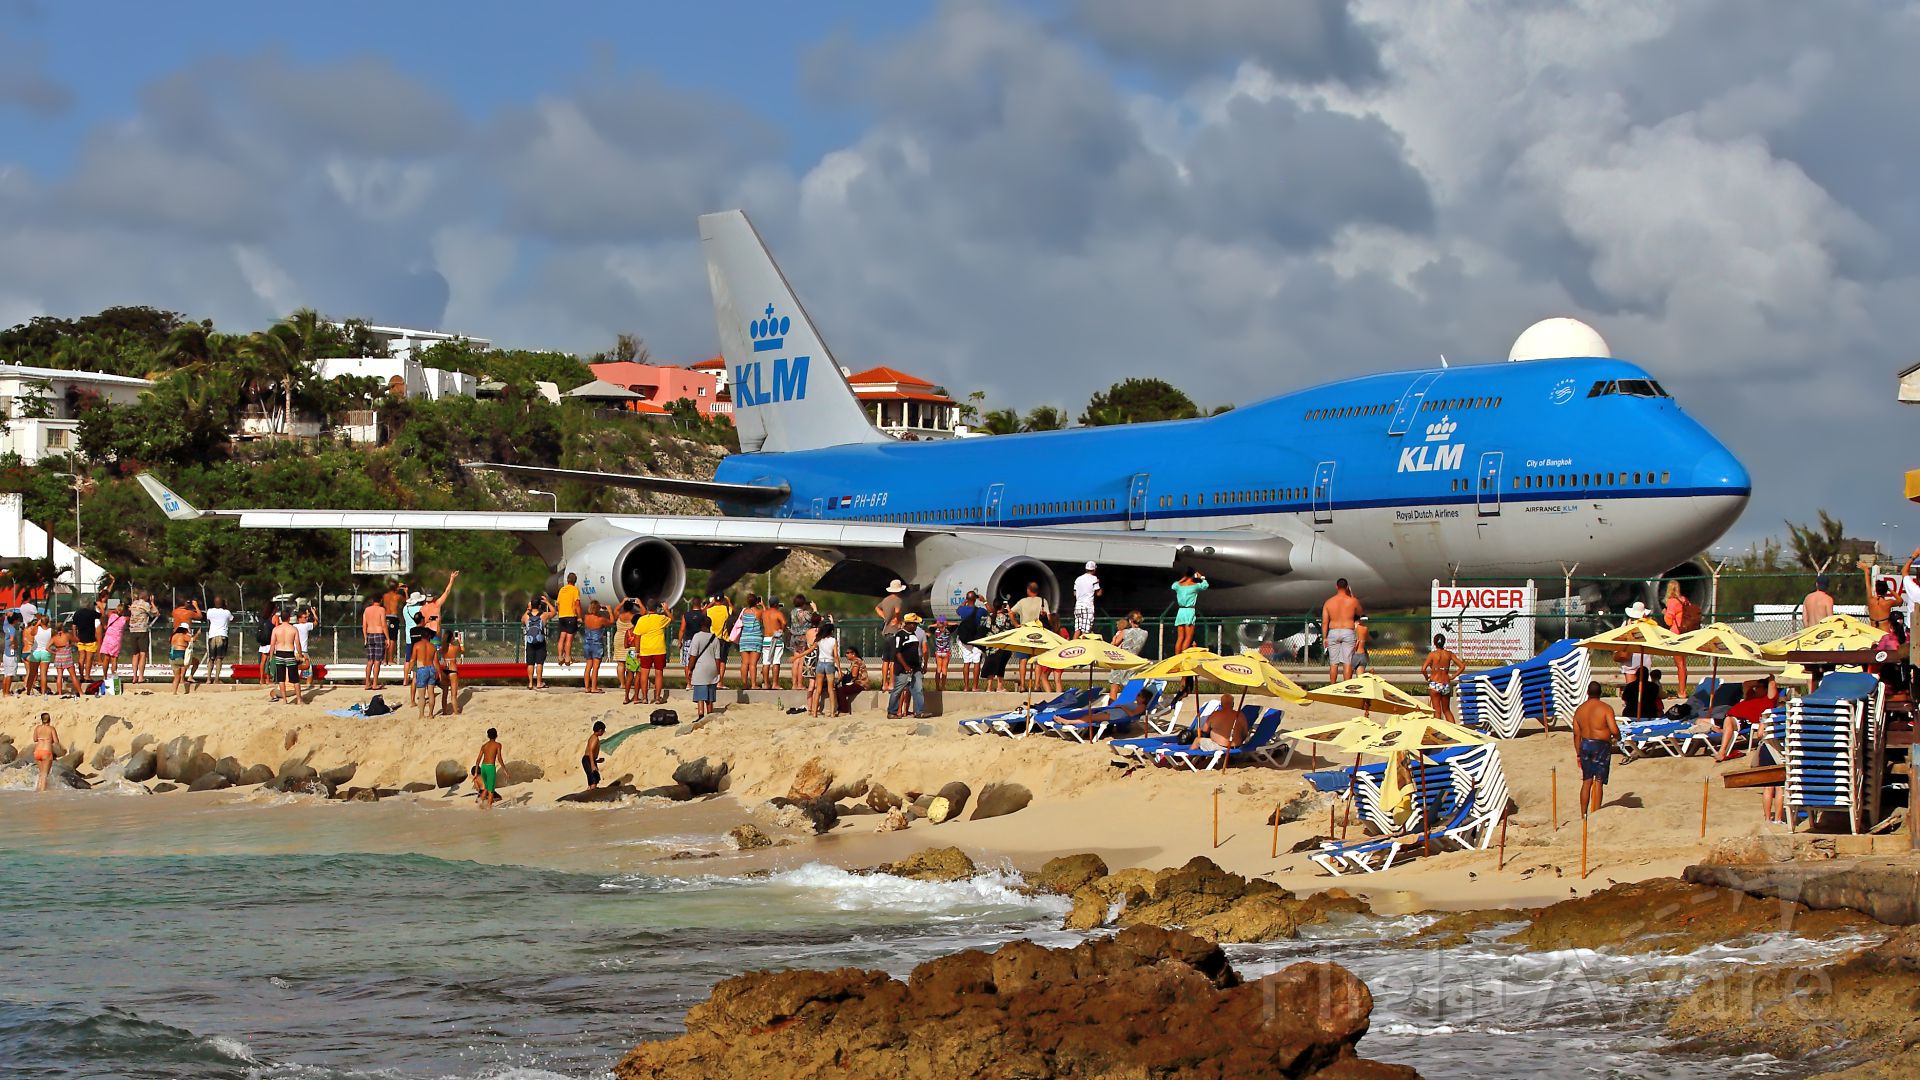 Boeing 747-400 (PH-BFB) - Boeing 747 KLM (PH-BFB) in the afternoon at Maho Beach. In Rolling on taxiway for an imminent take-off runway 10.Google Earth:18°2'21"N / 63°7'14"W